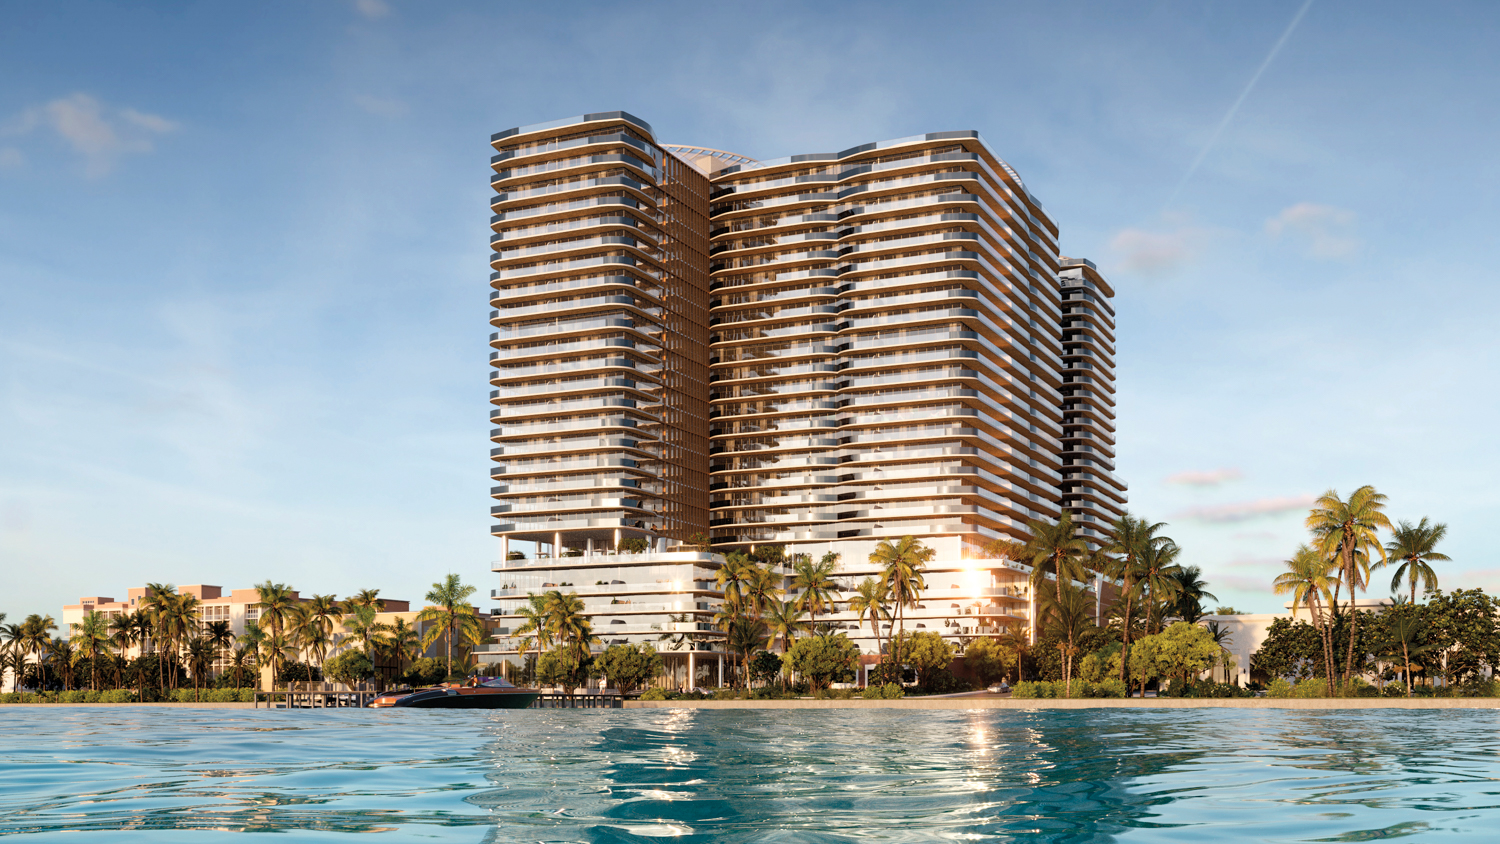 Olara condo tower façade behind a line of palm trees and waterfront